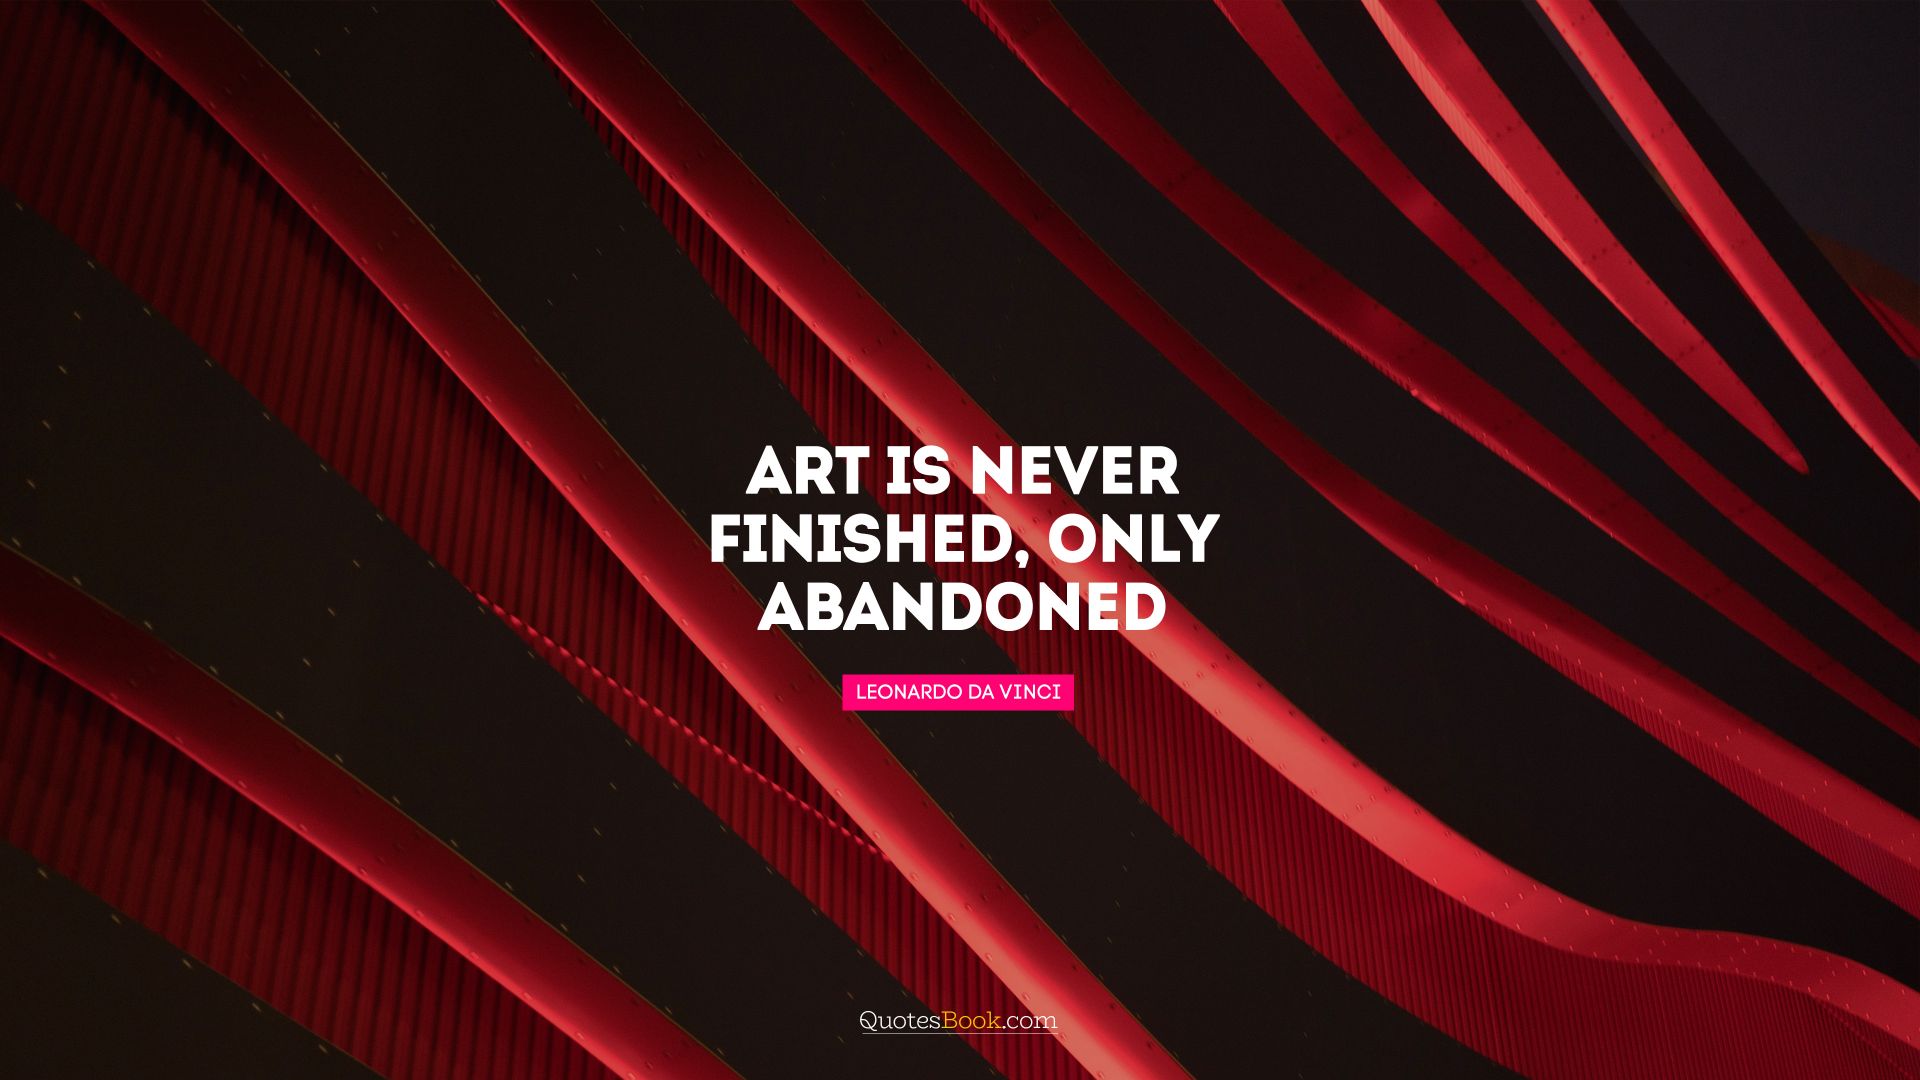 Art is never finished, only abandoned. - Quote by Leonardo da Vinci